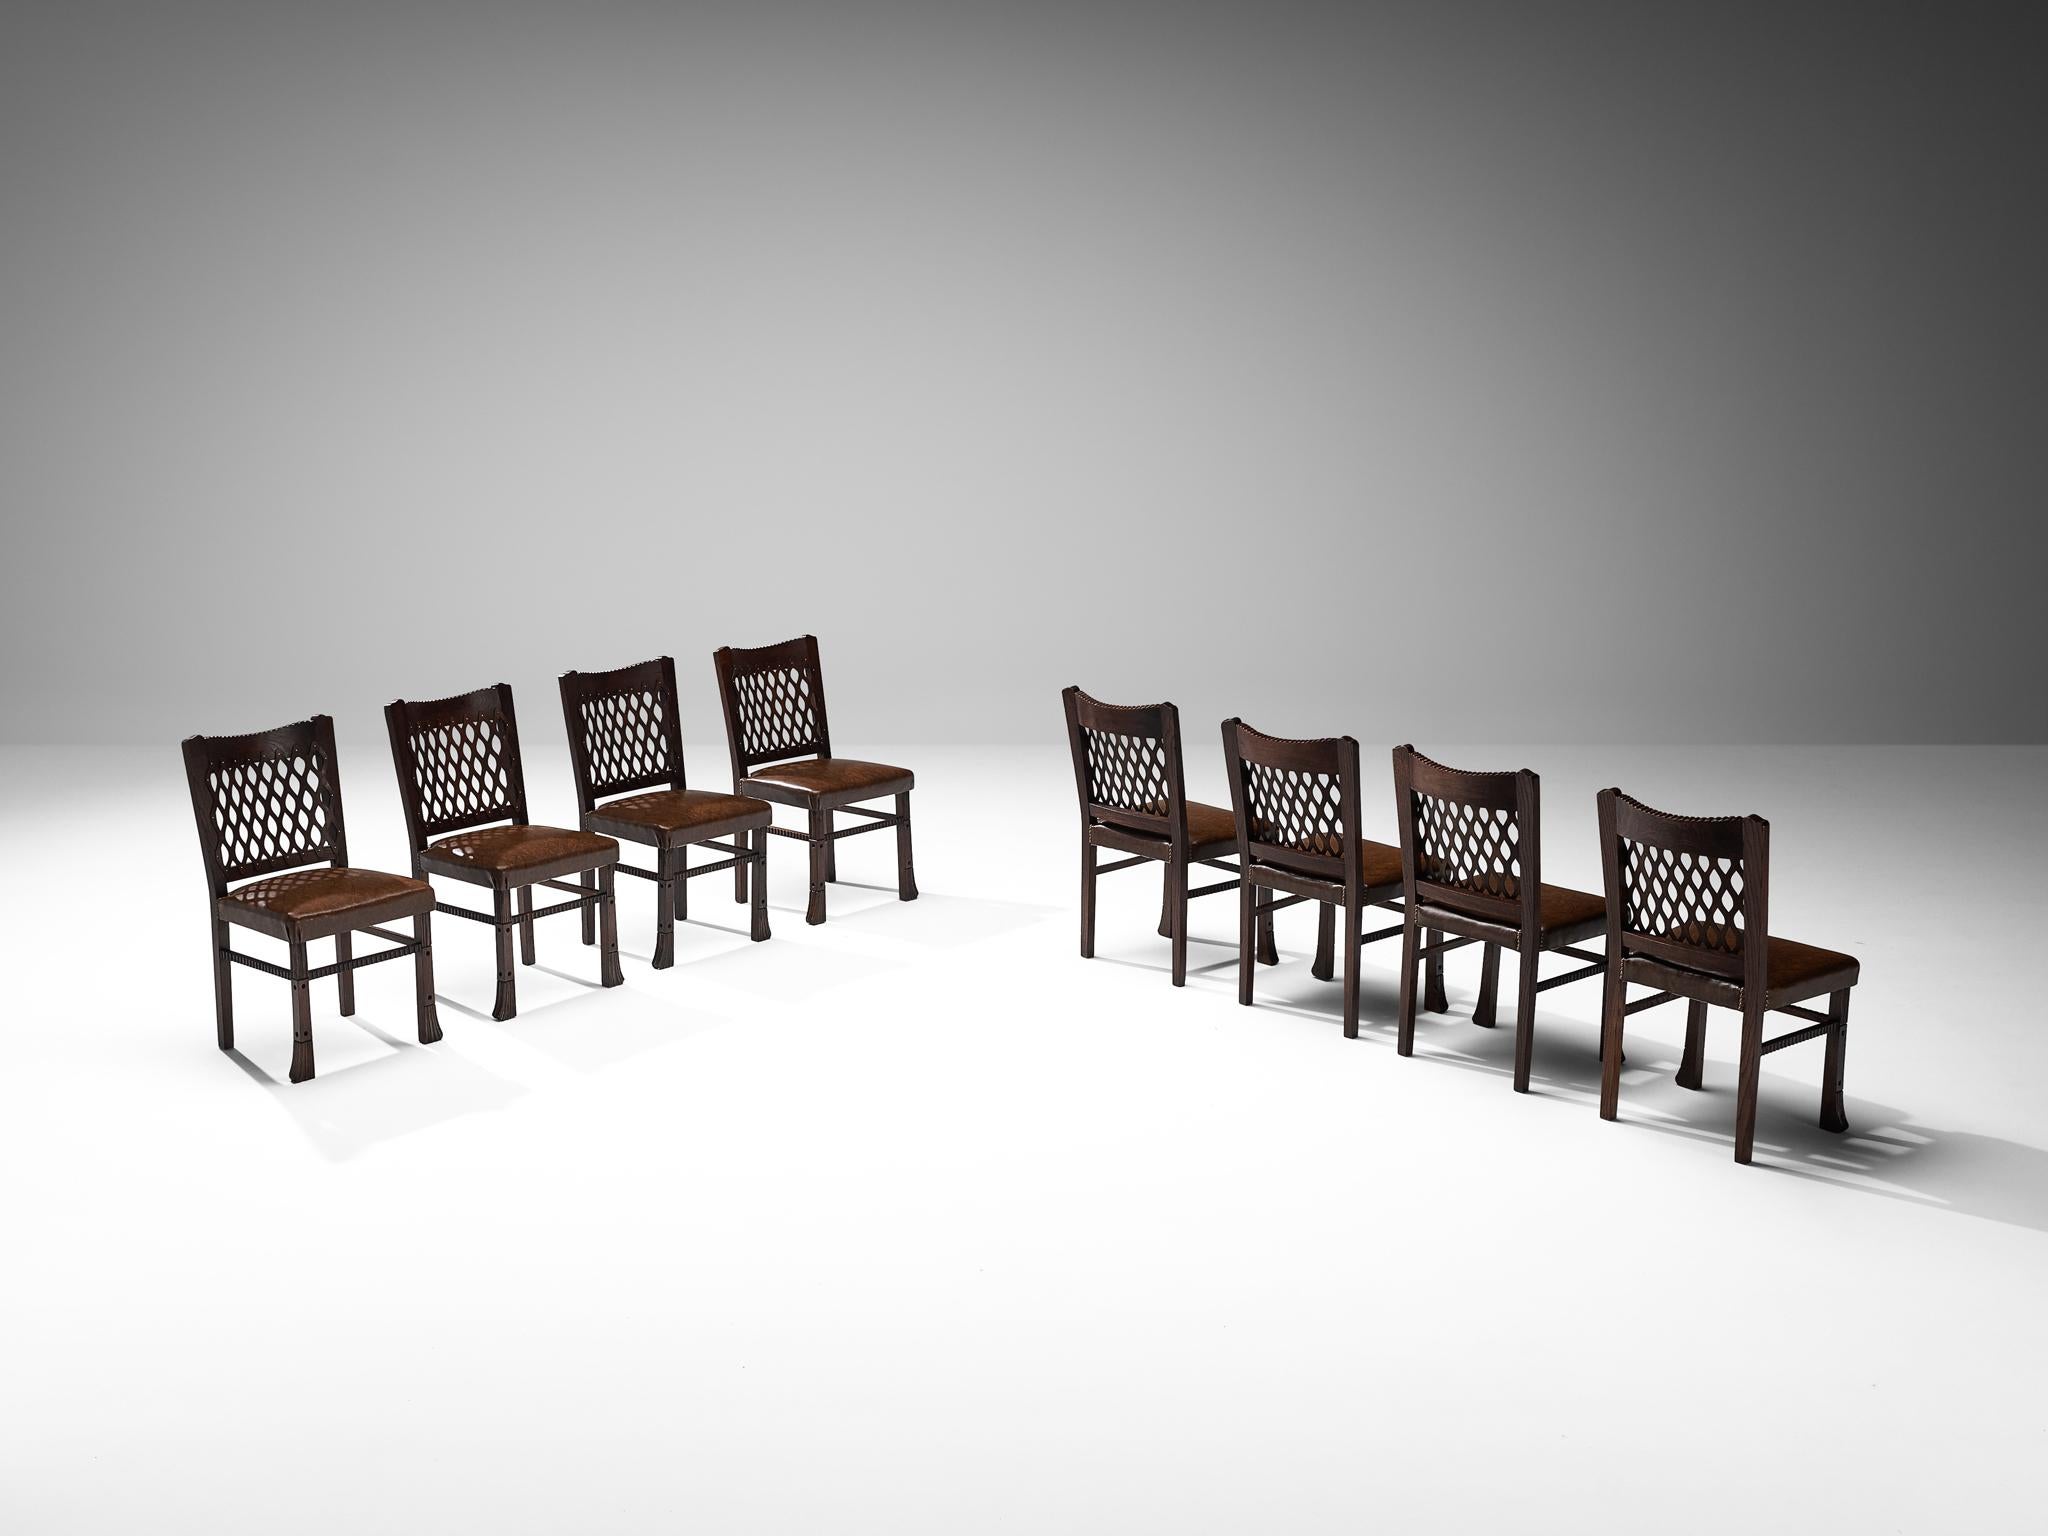 Ernesto Valabrega, set of eight dining chairs, oak, leather, metal, Italy, circa 1935

These well-sculpted chairs are created in one of the most influential periods for the arts namely the Art Deco Movement. The chairs bear witness to the designer's